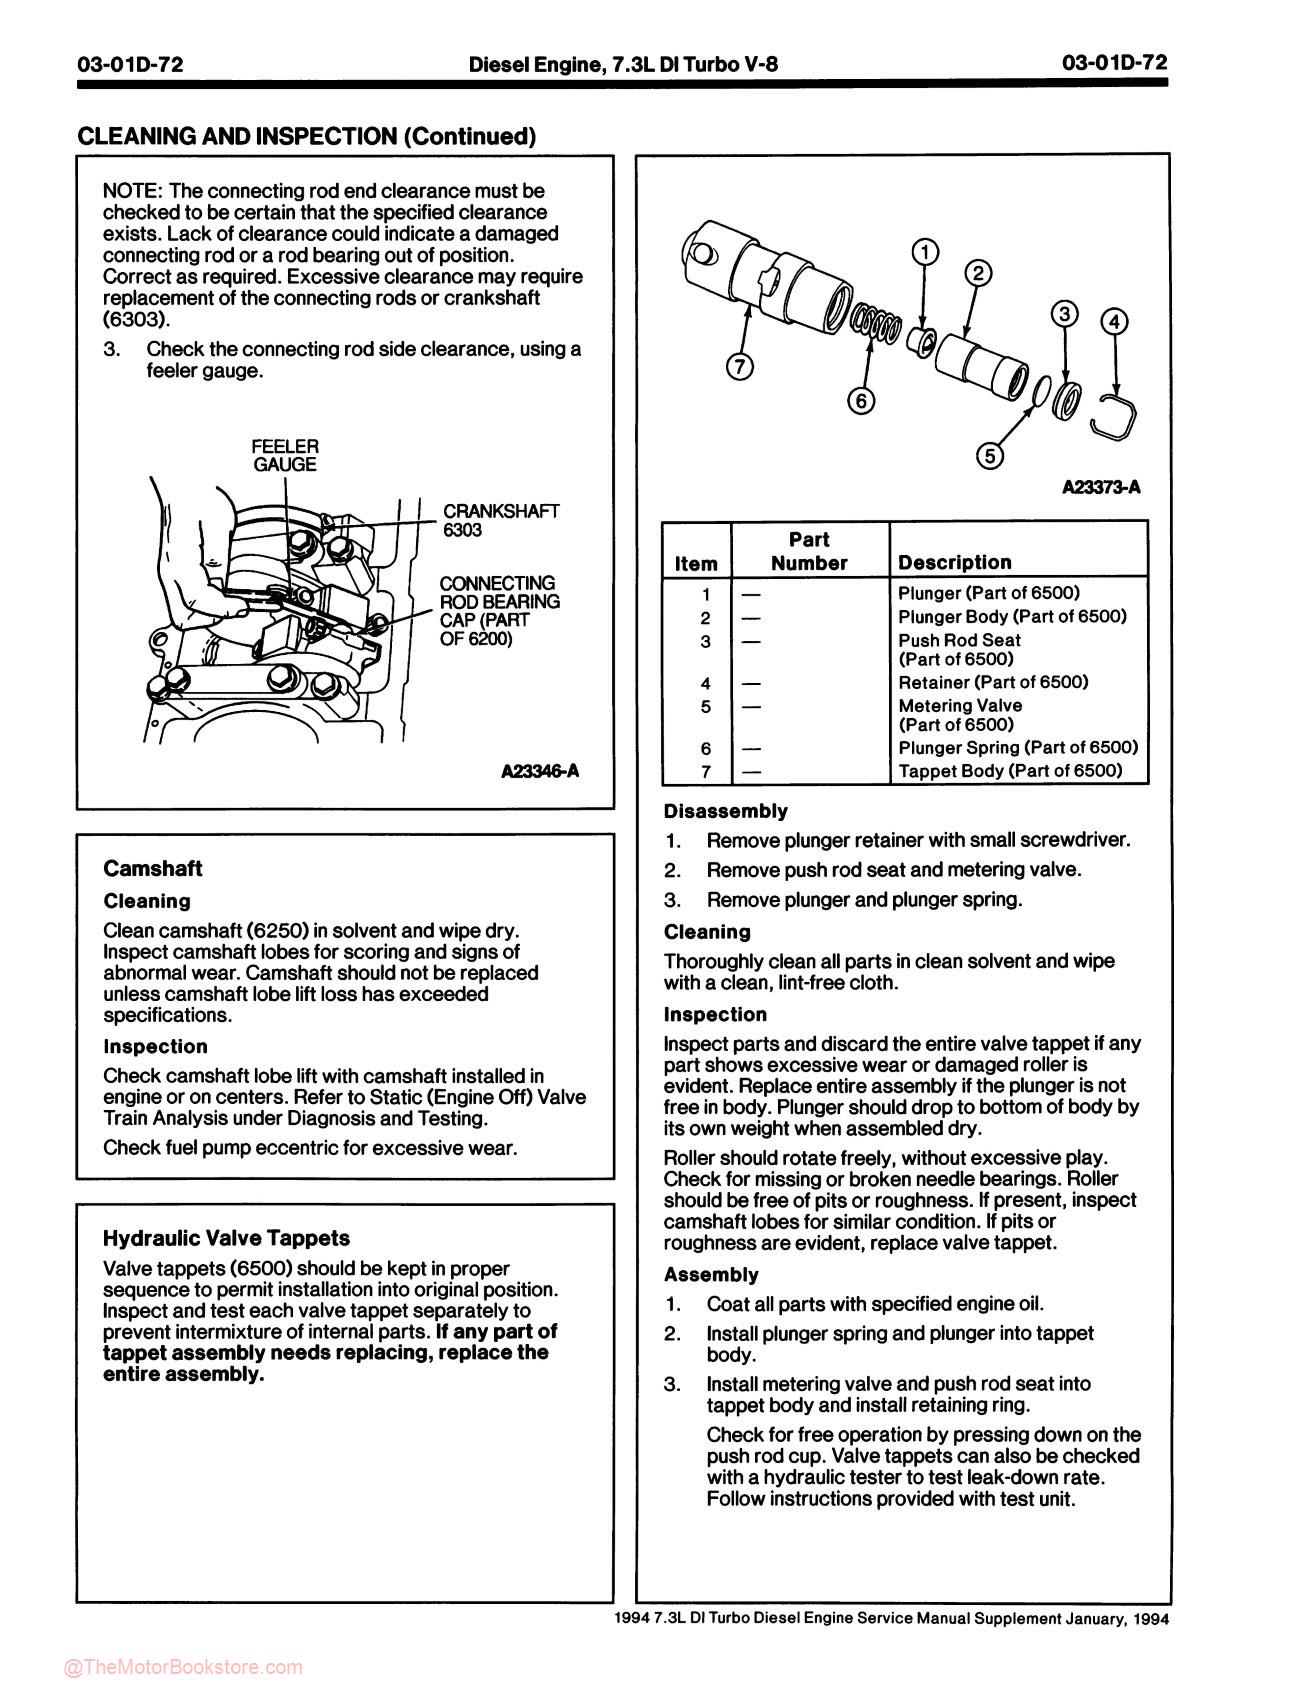 1994 Ford 7.3L DI Turbo Diesel Service Manual Supplement - Sample Page 1